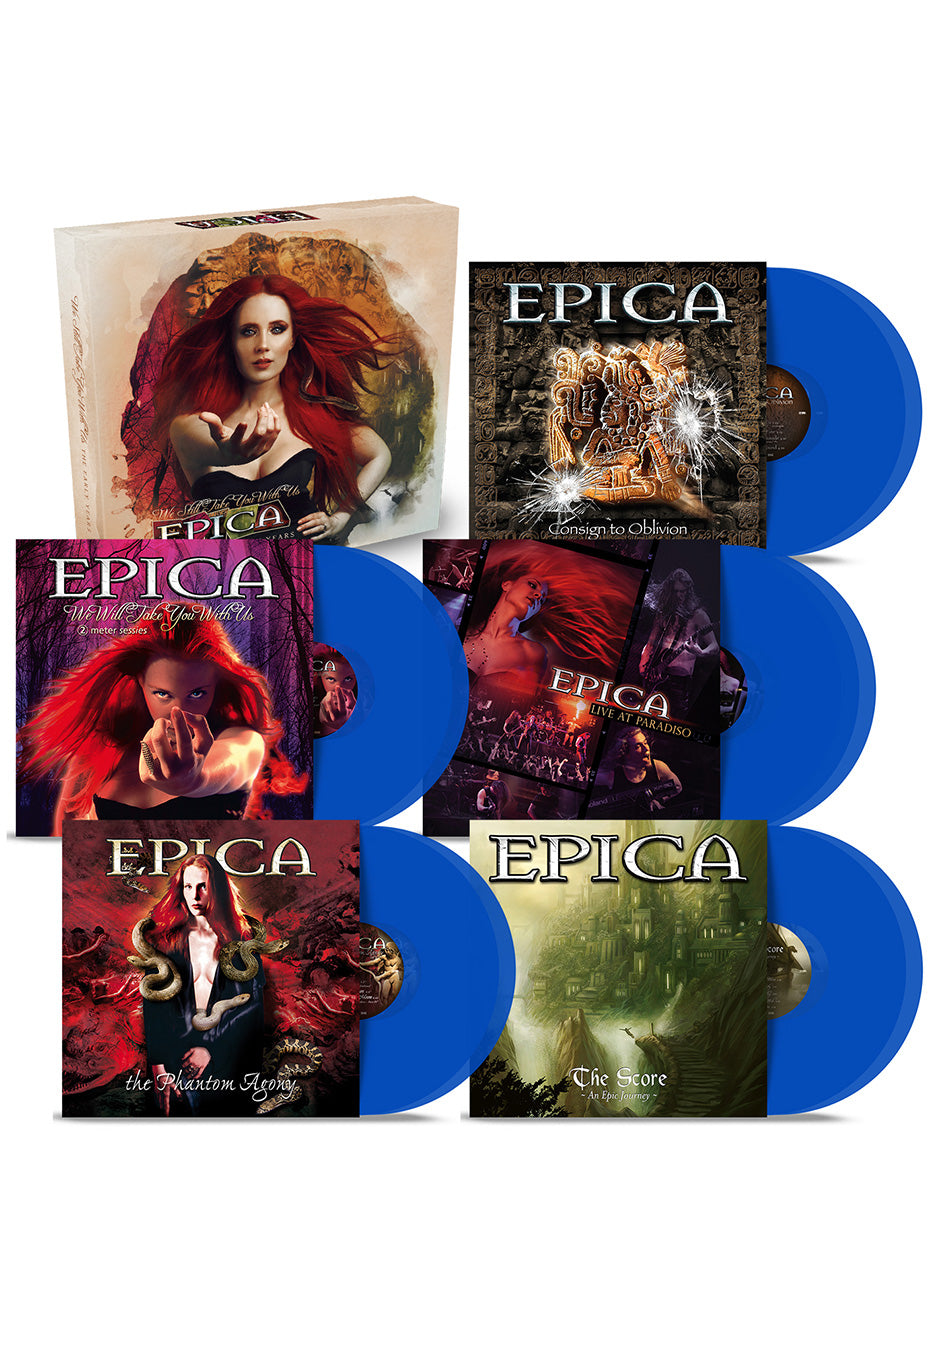 Epica - We Still Take You With Us: The Early Years Ltd. Blue - Colored 11 Vinyl Box